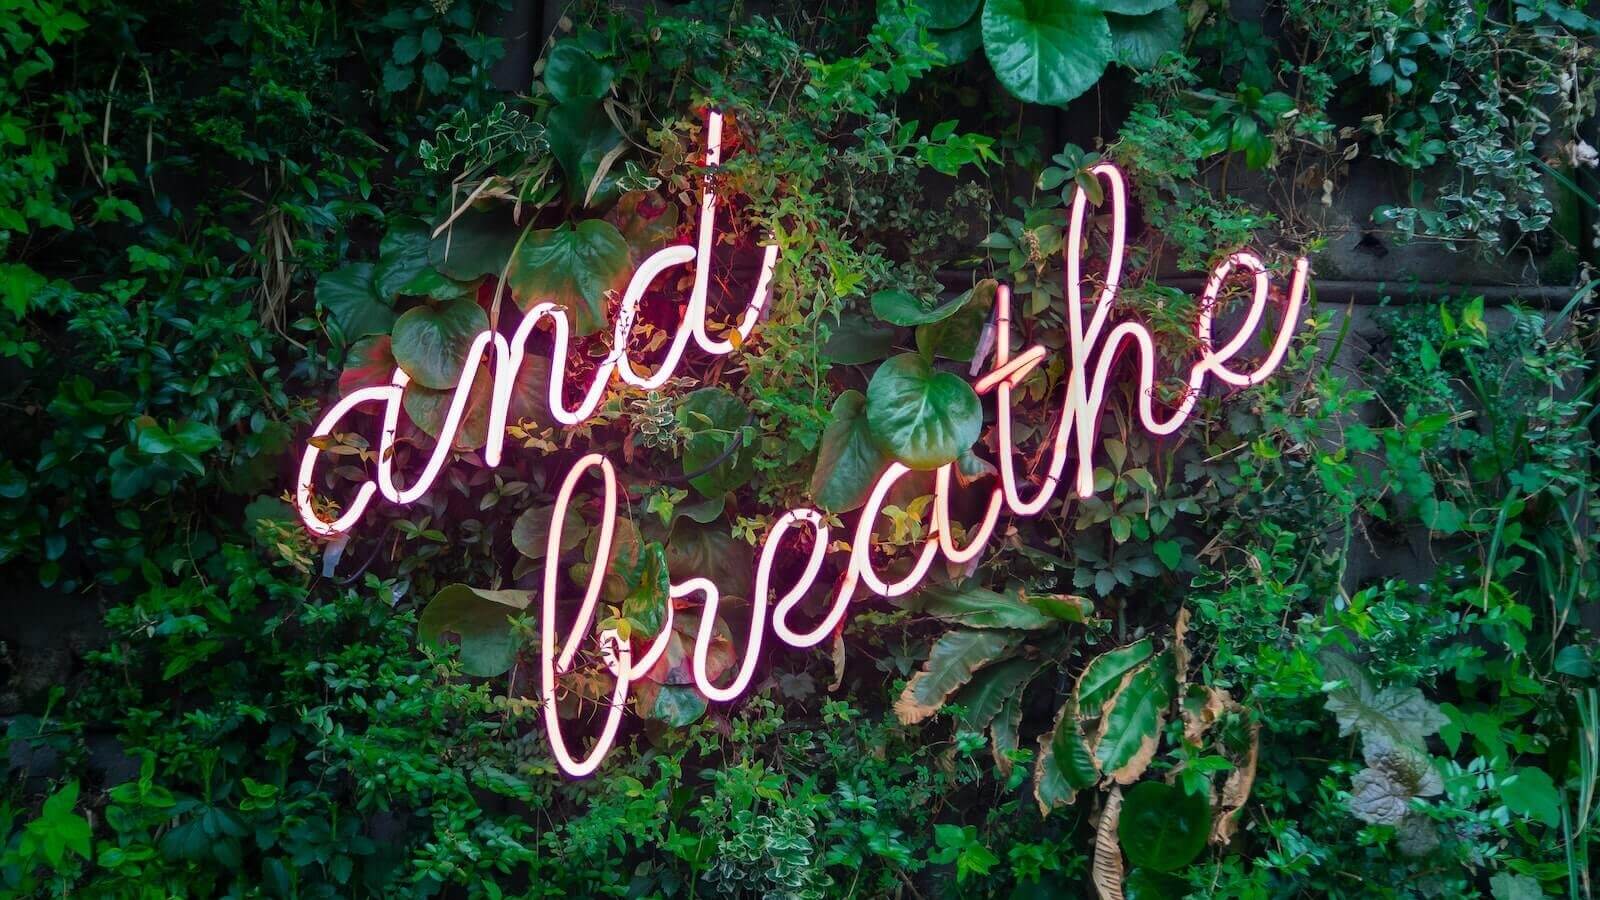 "and breathe" neon sign on green foliage